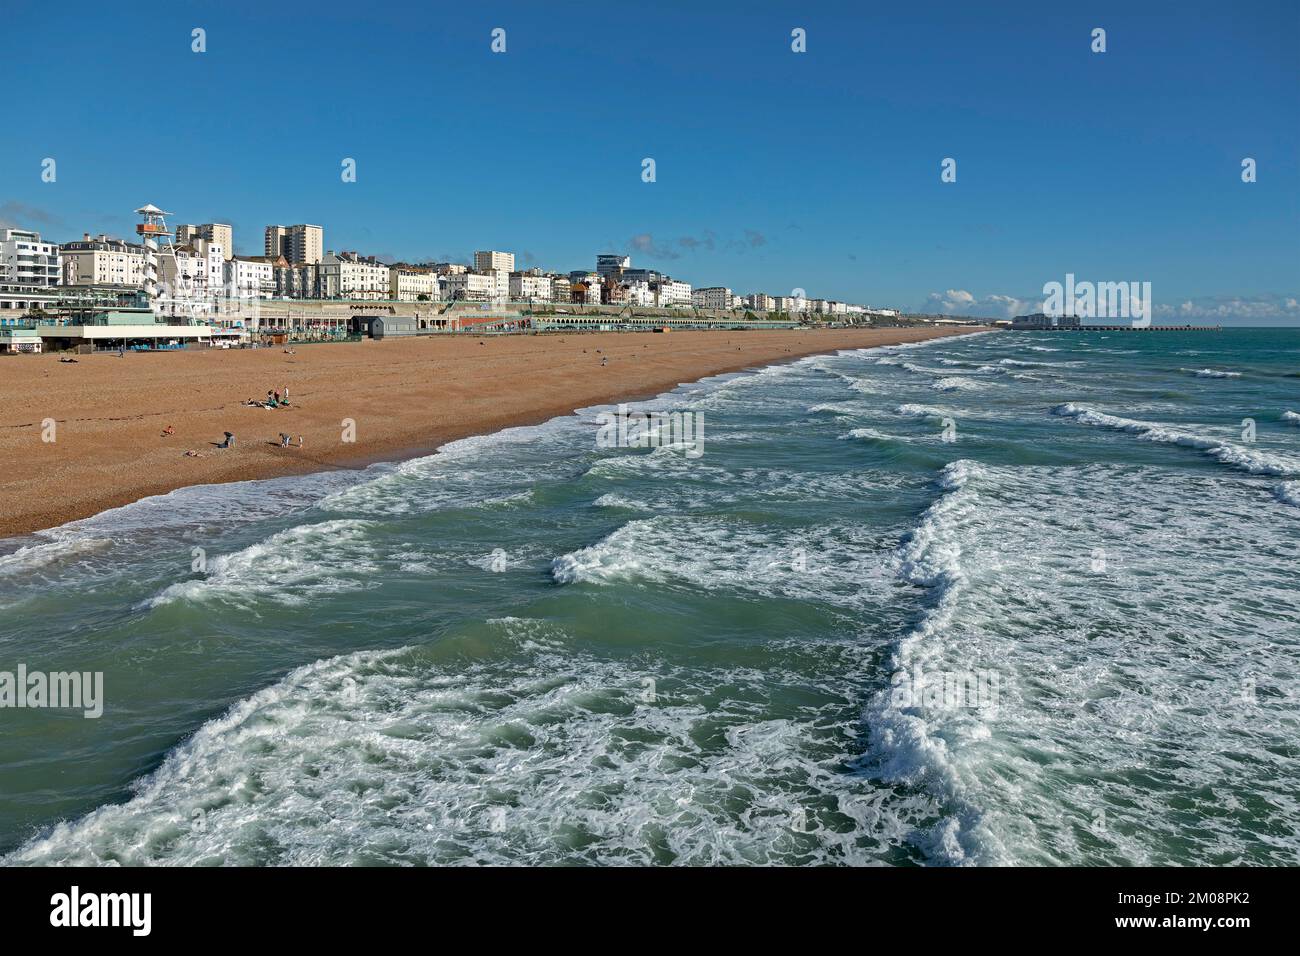 Front de mer, mer, plage, Brighton, East Sussex, Angleterre, Royaume-Uni, Europe Banque D'Images